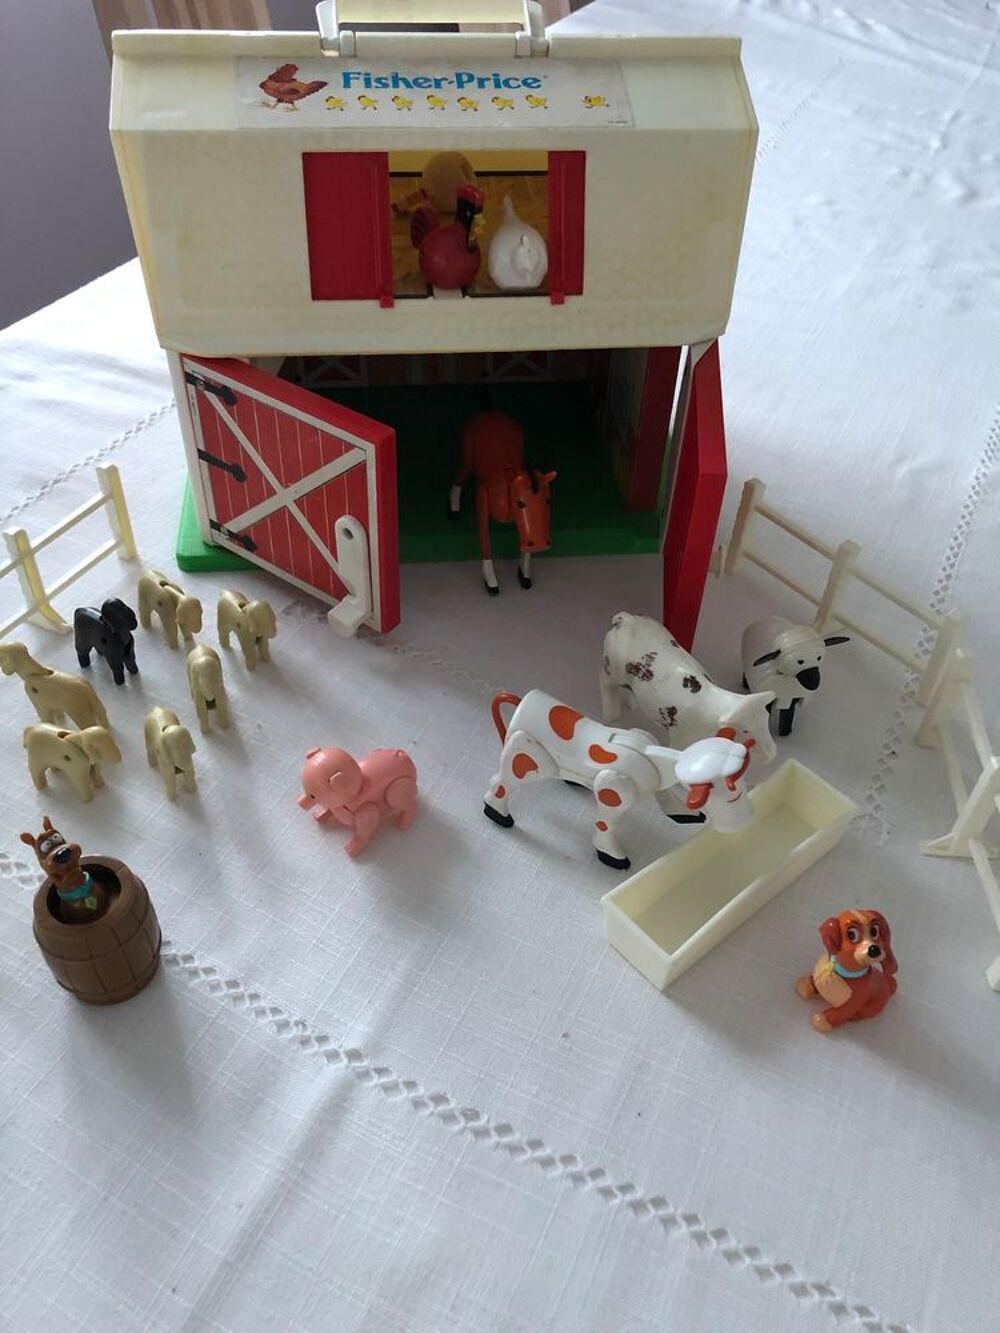 FERME FISHER PRICE Jeux / jouets